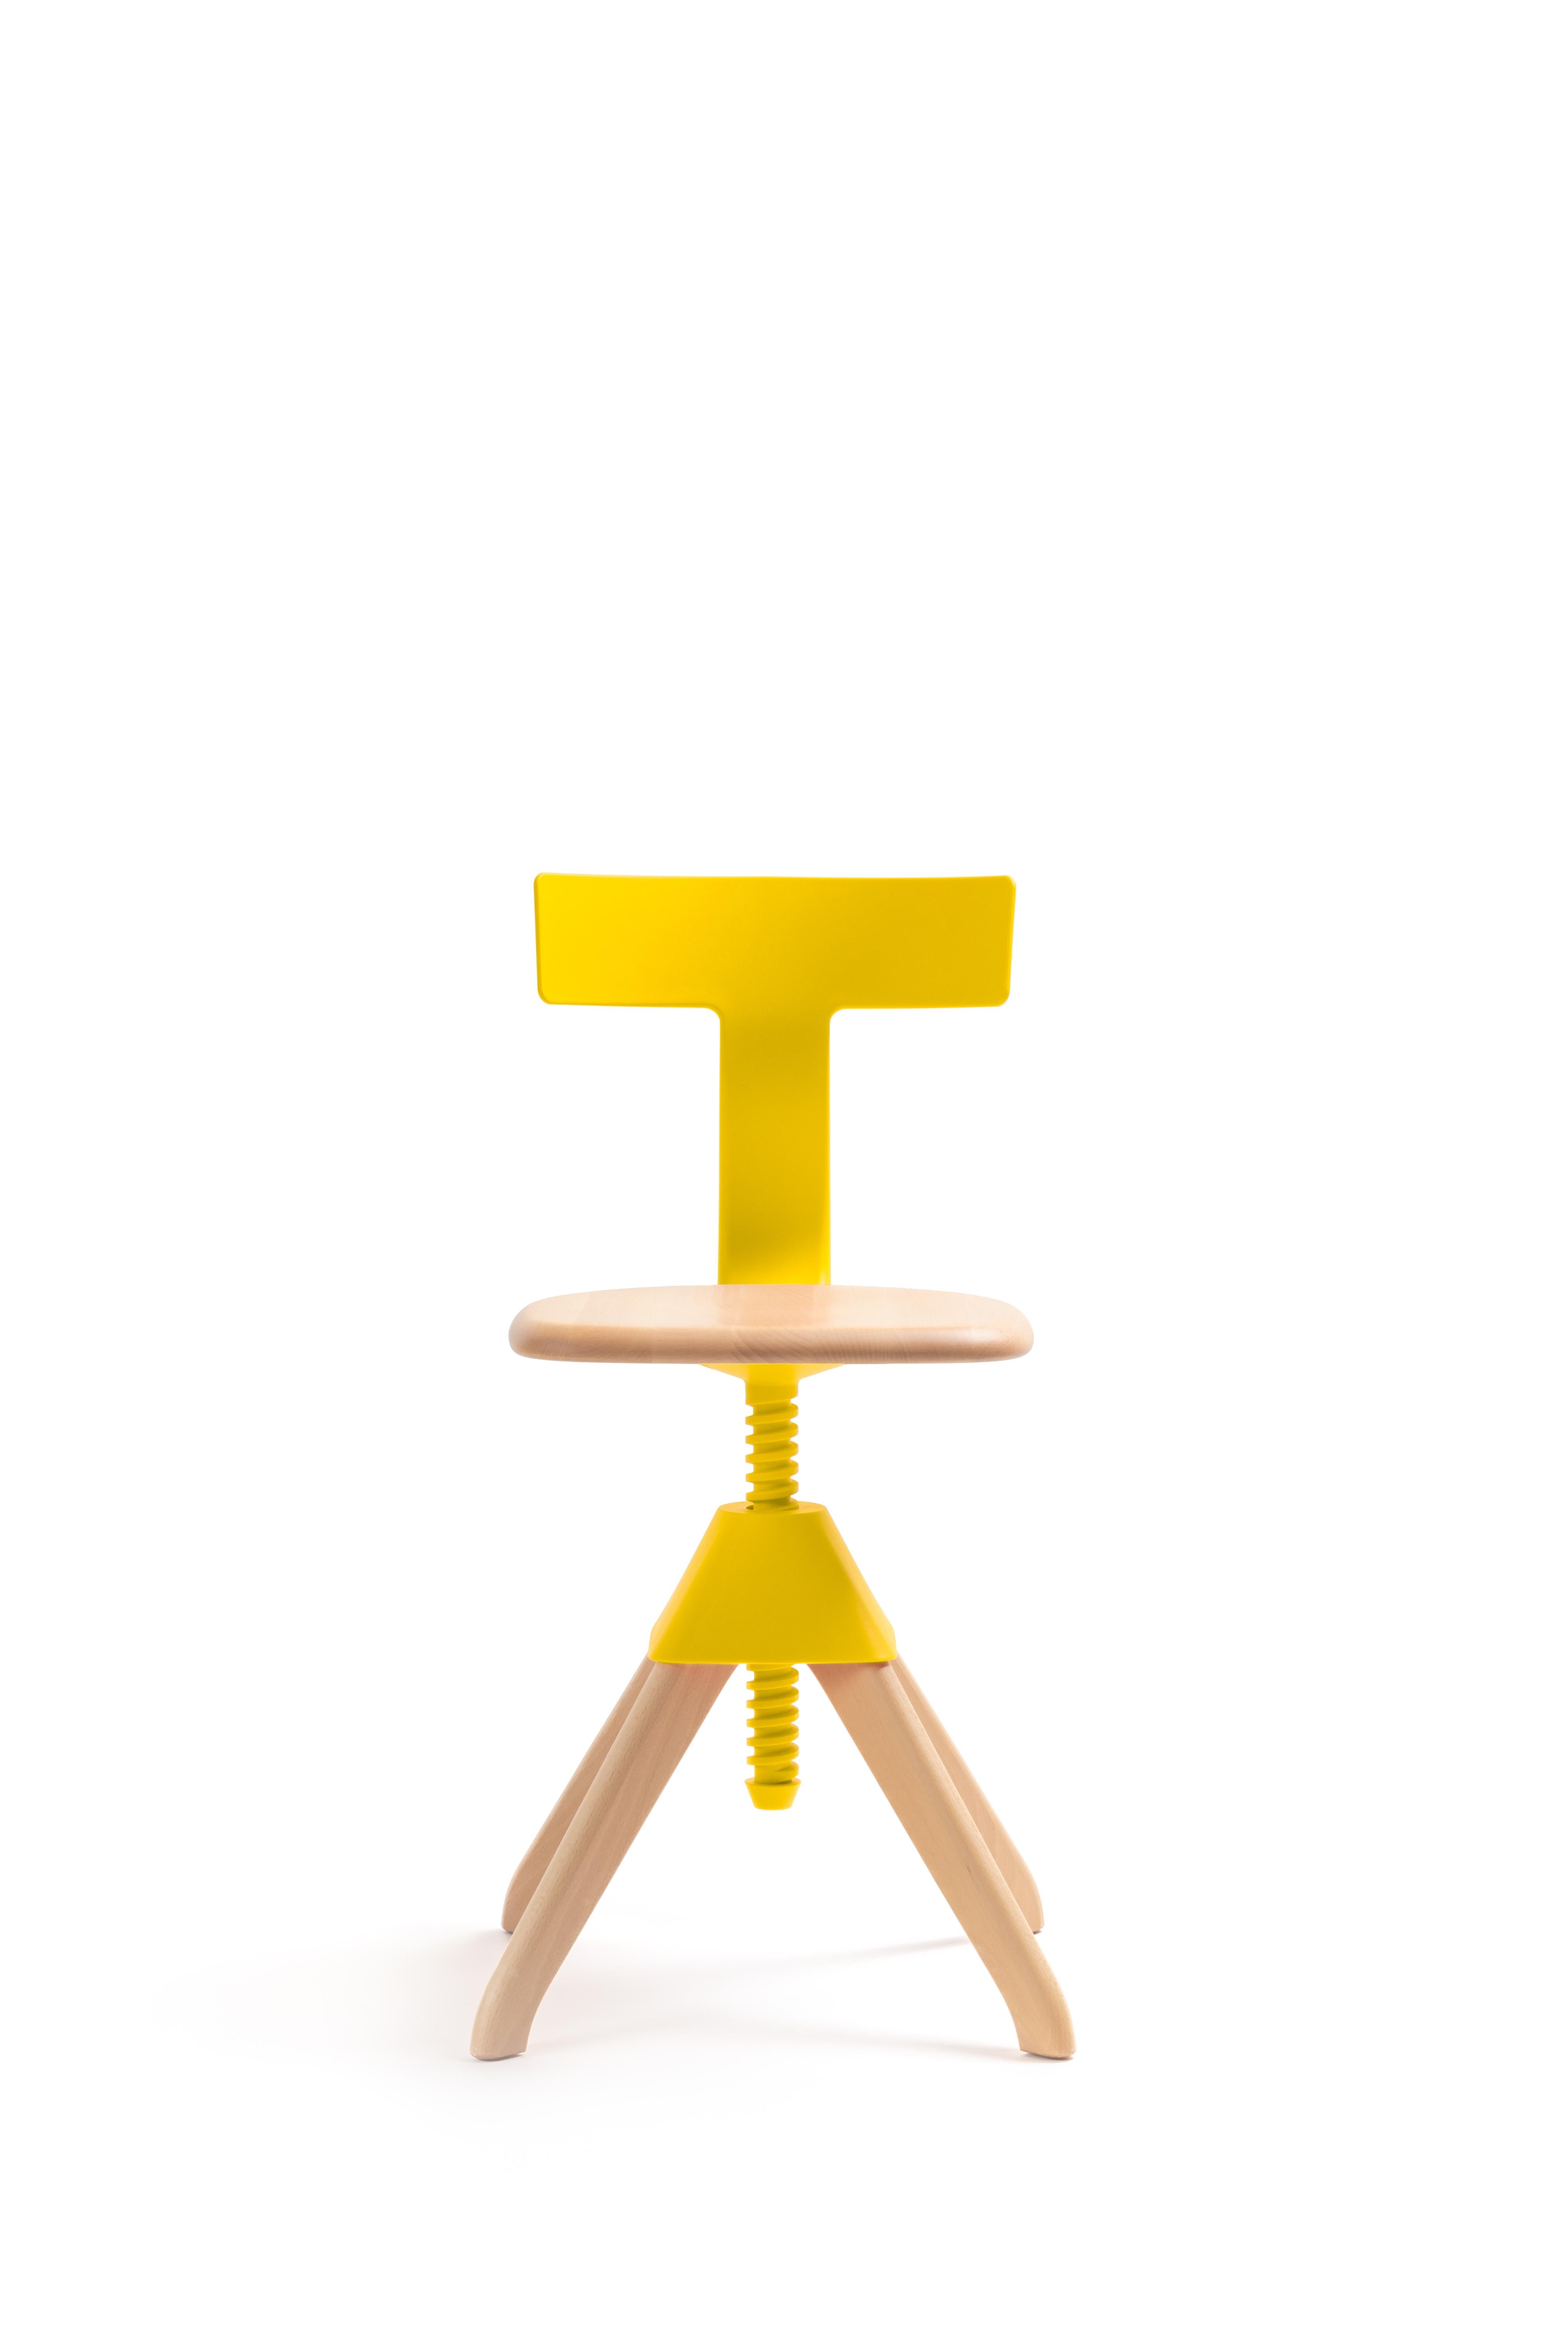 The Wild Bunch collection includes a chair (Tuffy), two stools (Tom & Jerry), three dif- ferent tables (Butch, Cuckoo and Topsy) and two shelving systems (Spike and Tyke) offering a natural and functional approach and an amusing, friendly and